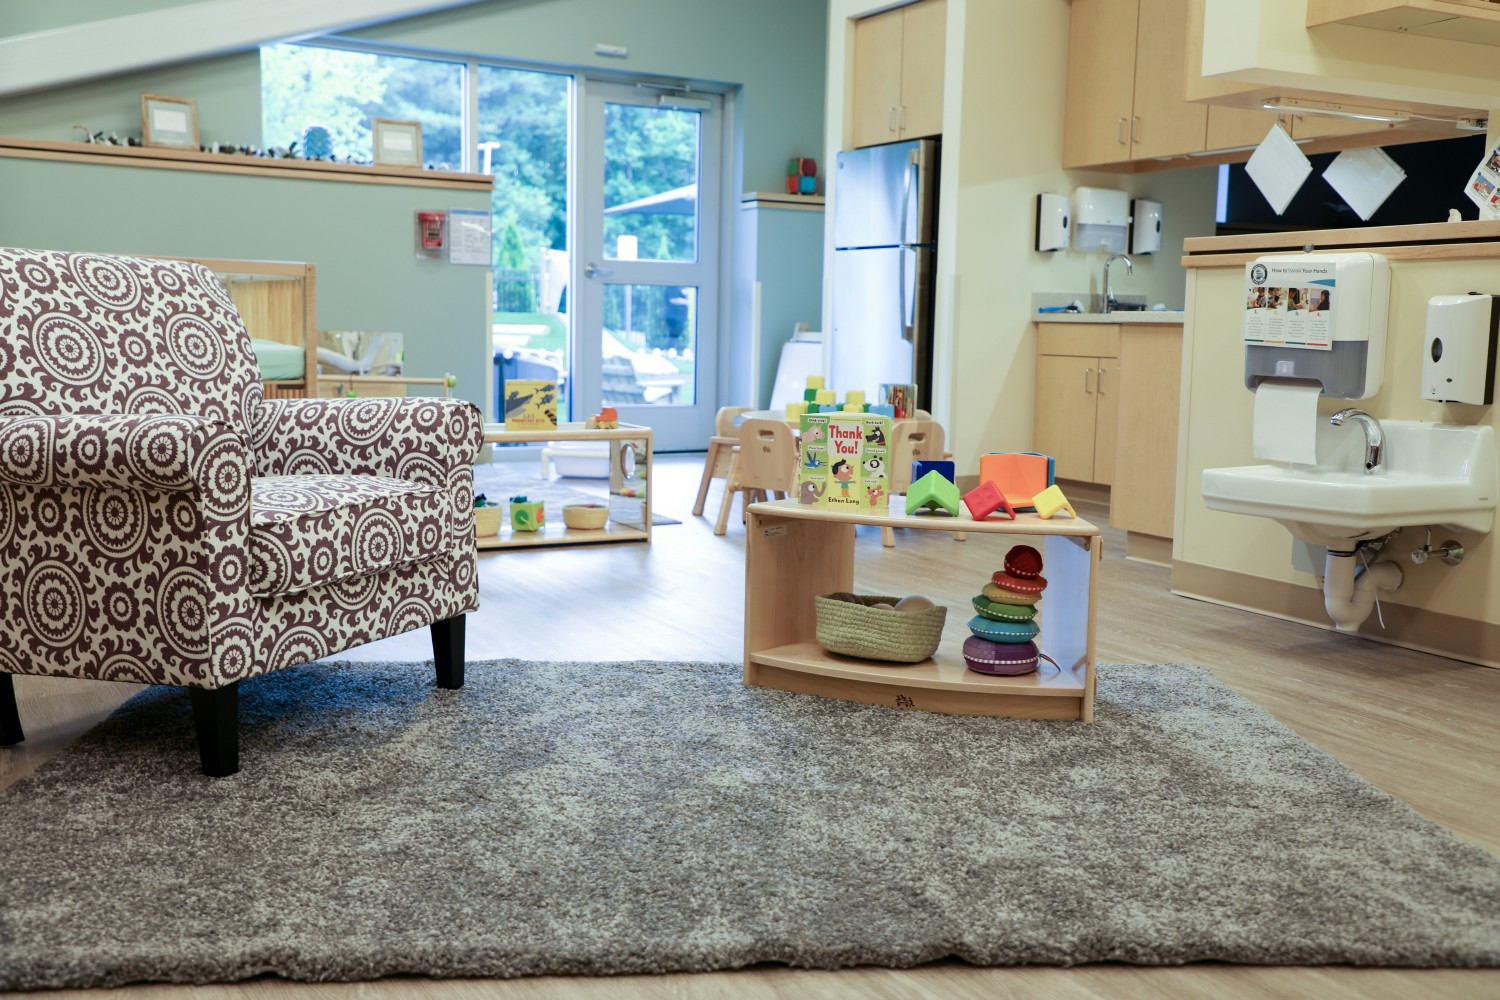 A glimpse inside one of our Bright Horizons child care centers. 